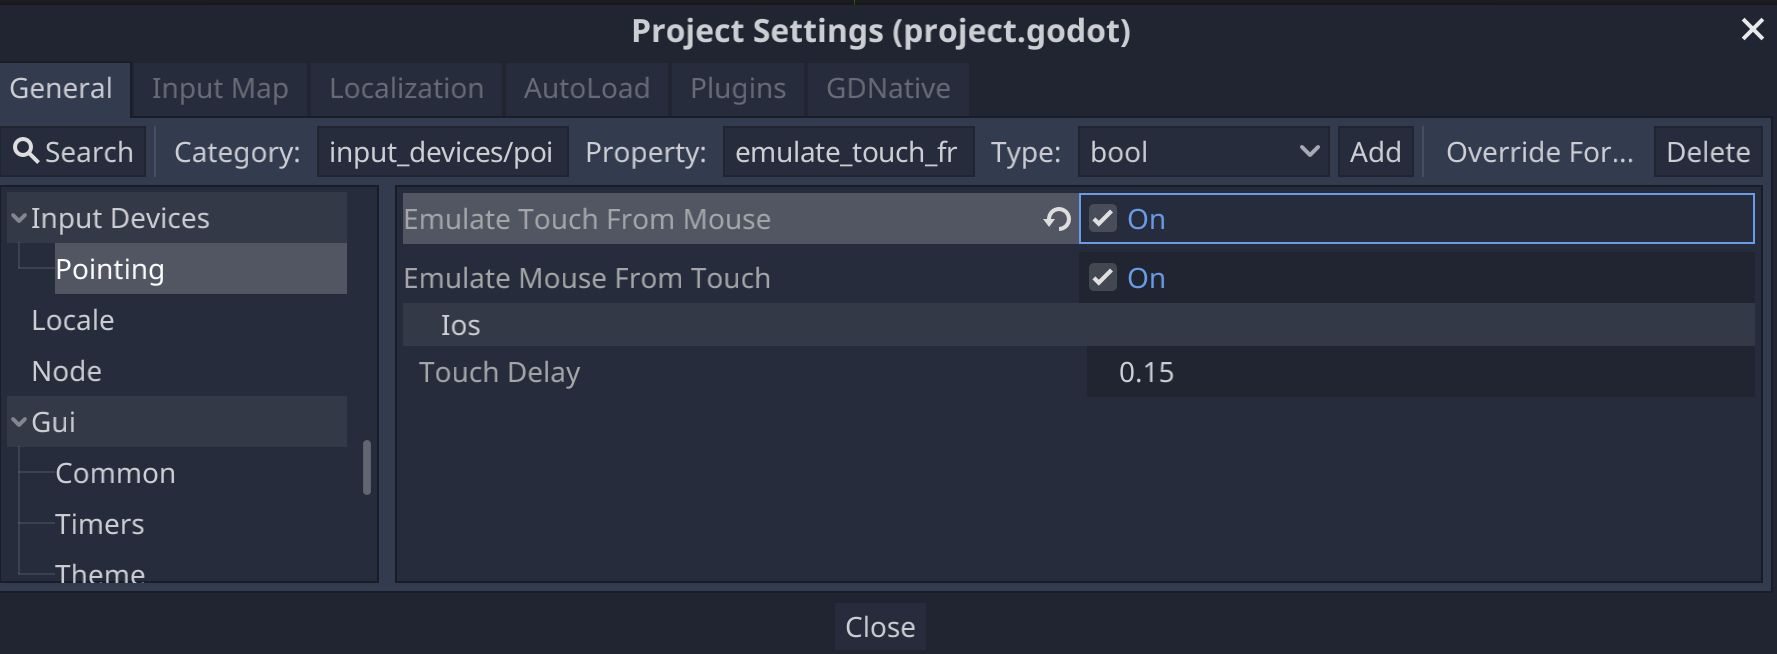 Godot project settings for input devices